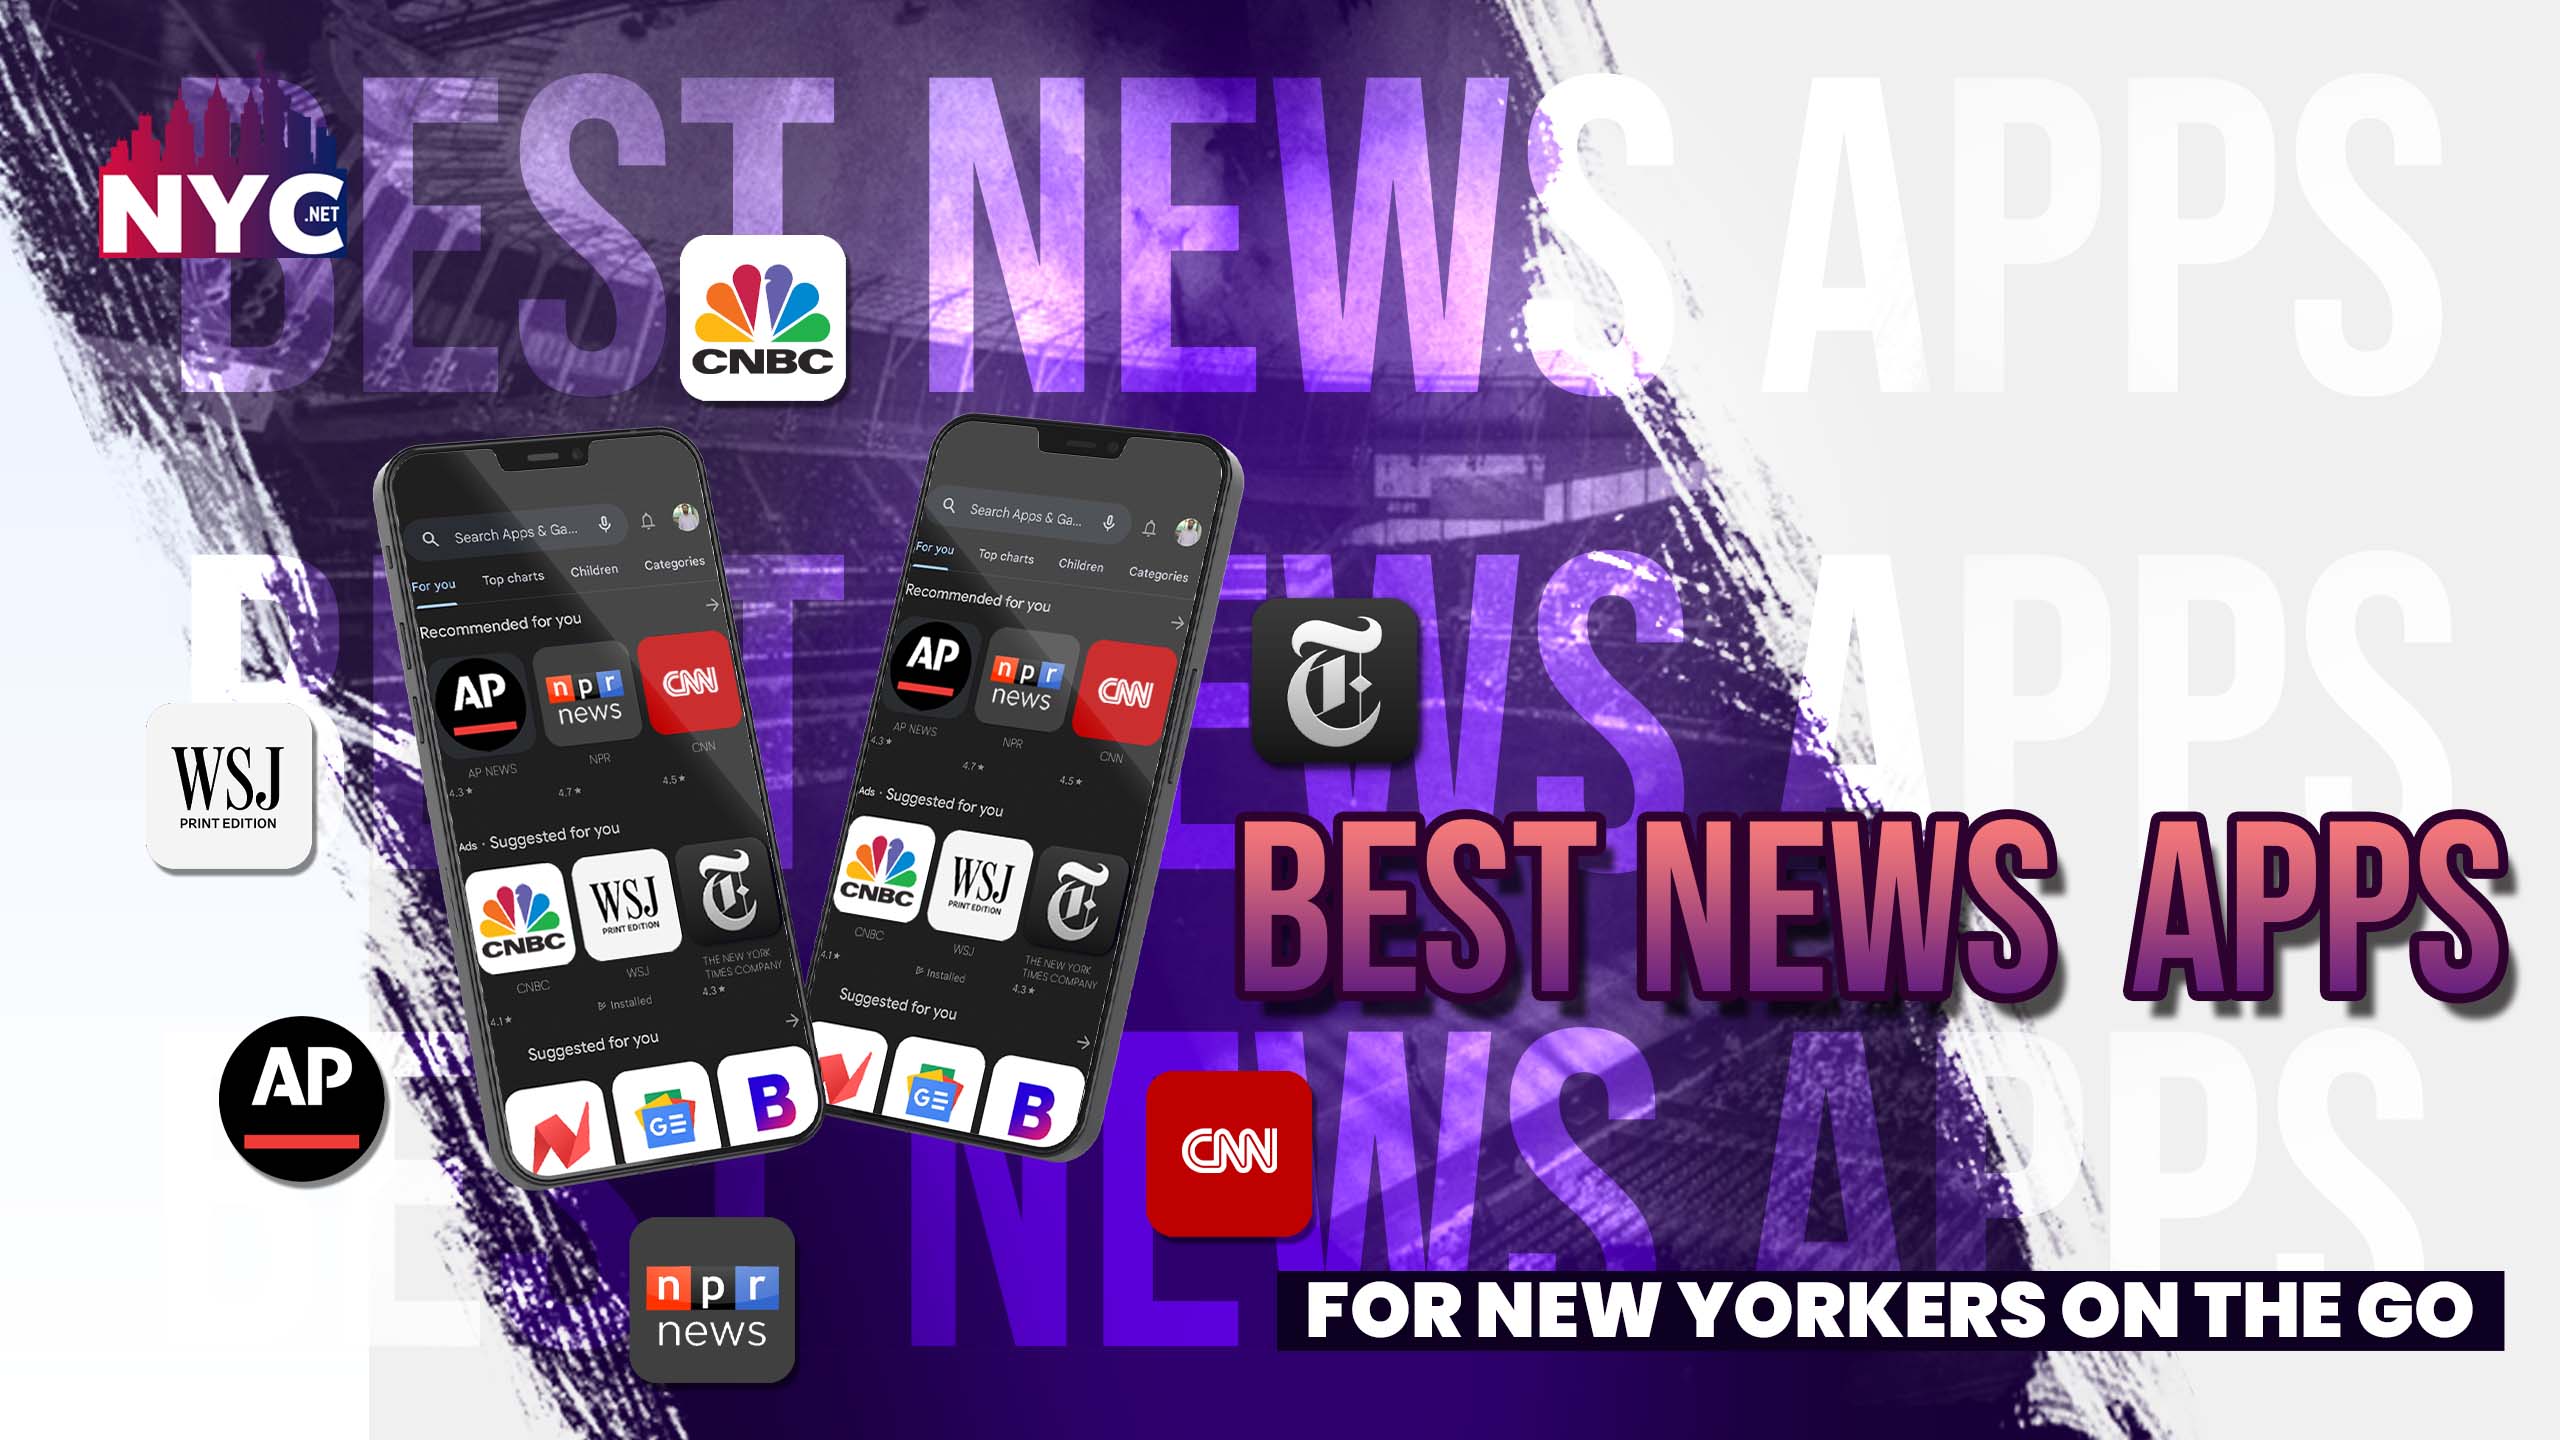 The Best News Apps